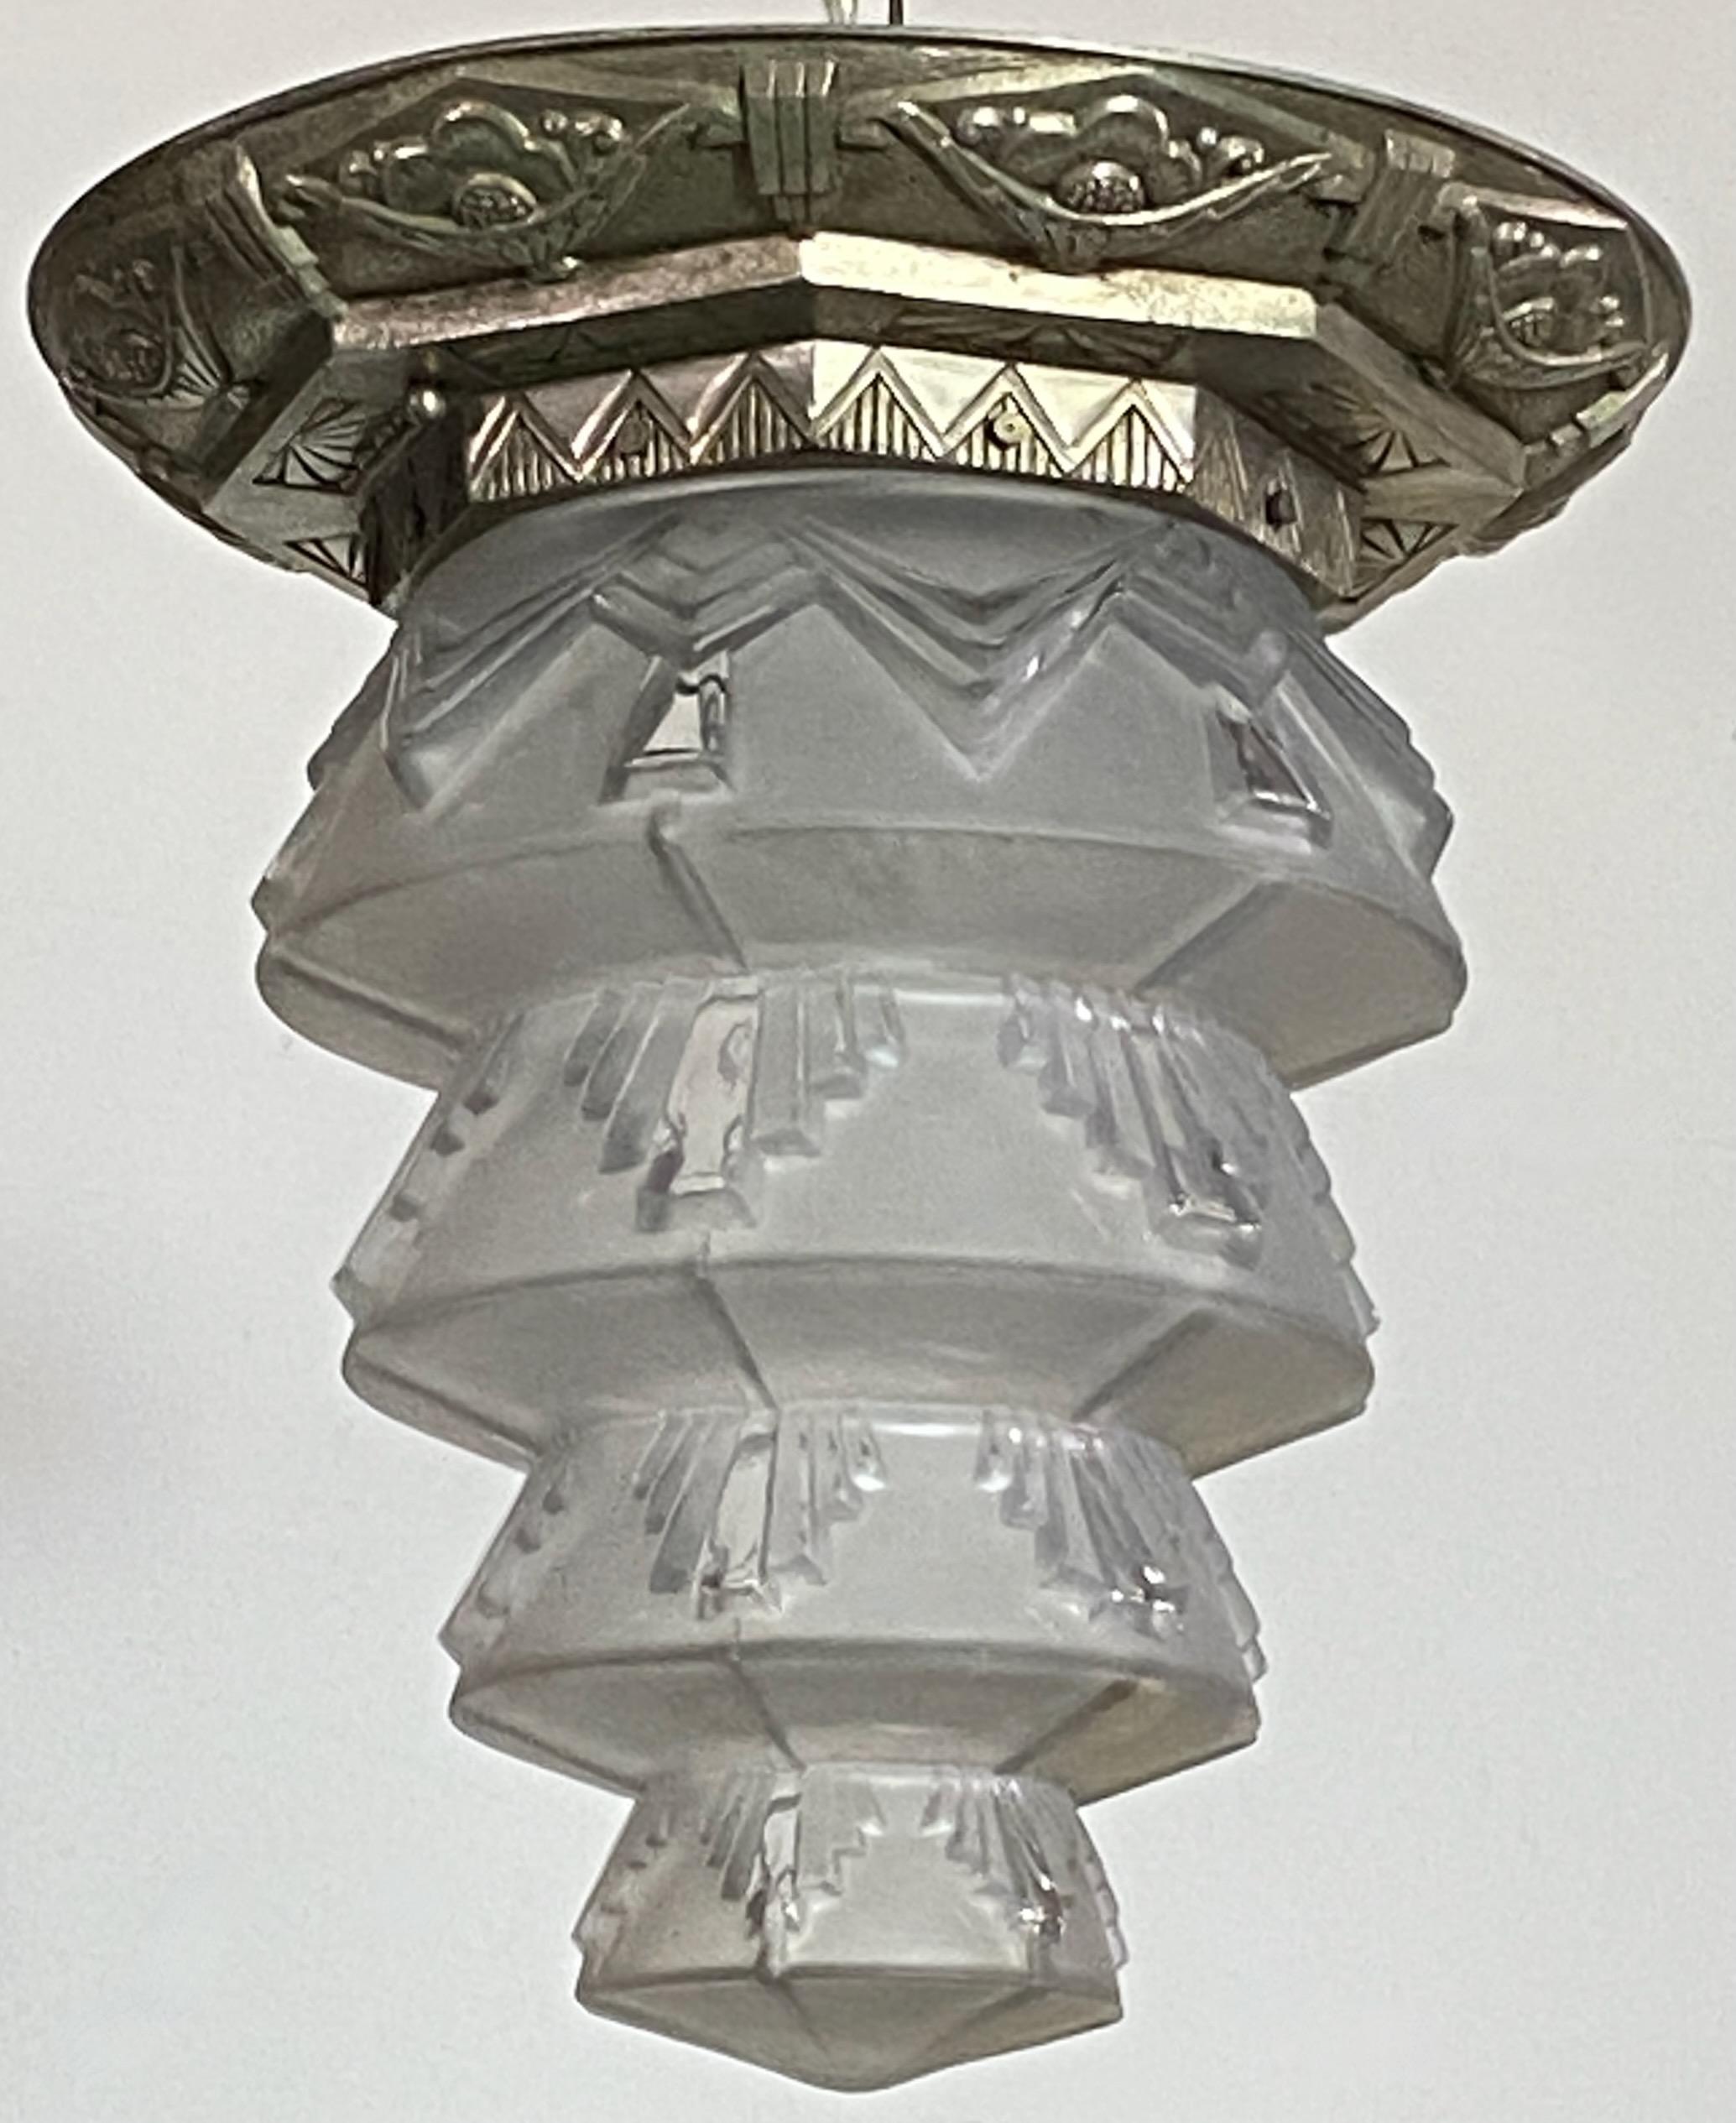 Original Art Deco French flush mount light fixture.
Nickel plated cast metal mounting with frosted glass shade.
This could be adapted to hang from a chain or a rod if desired.
23 inch length with chain.
Shade measures 9 inches high.
Recently